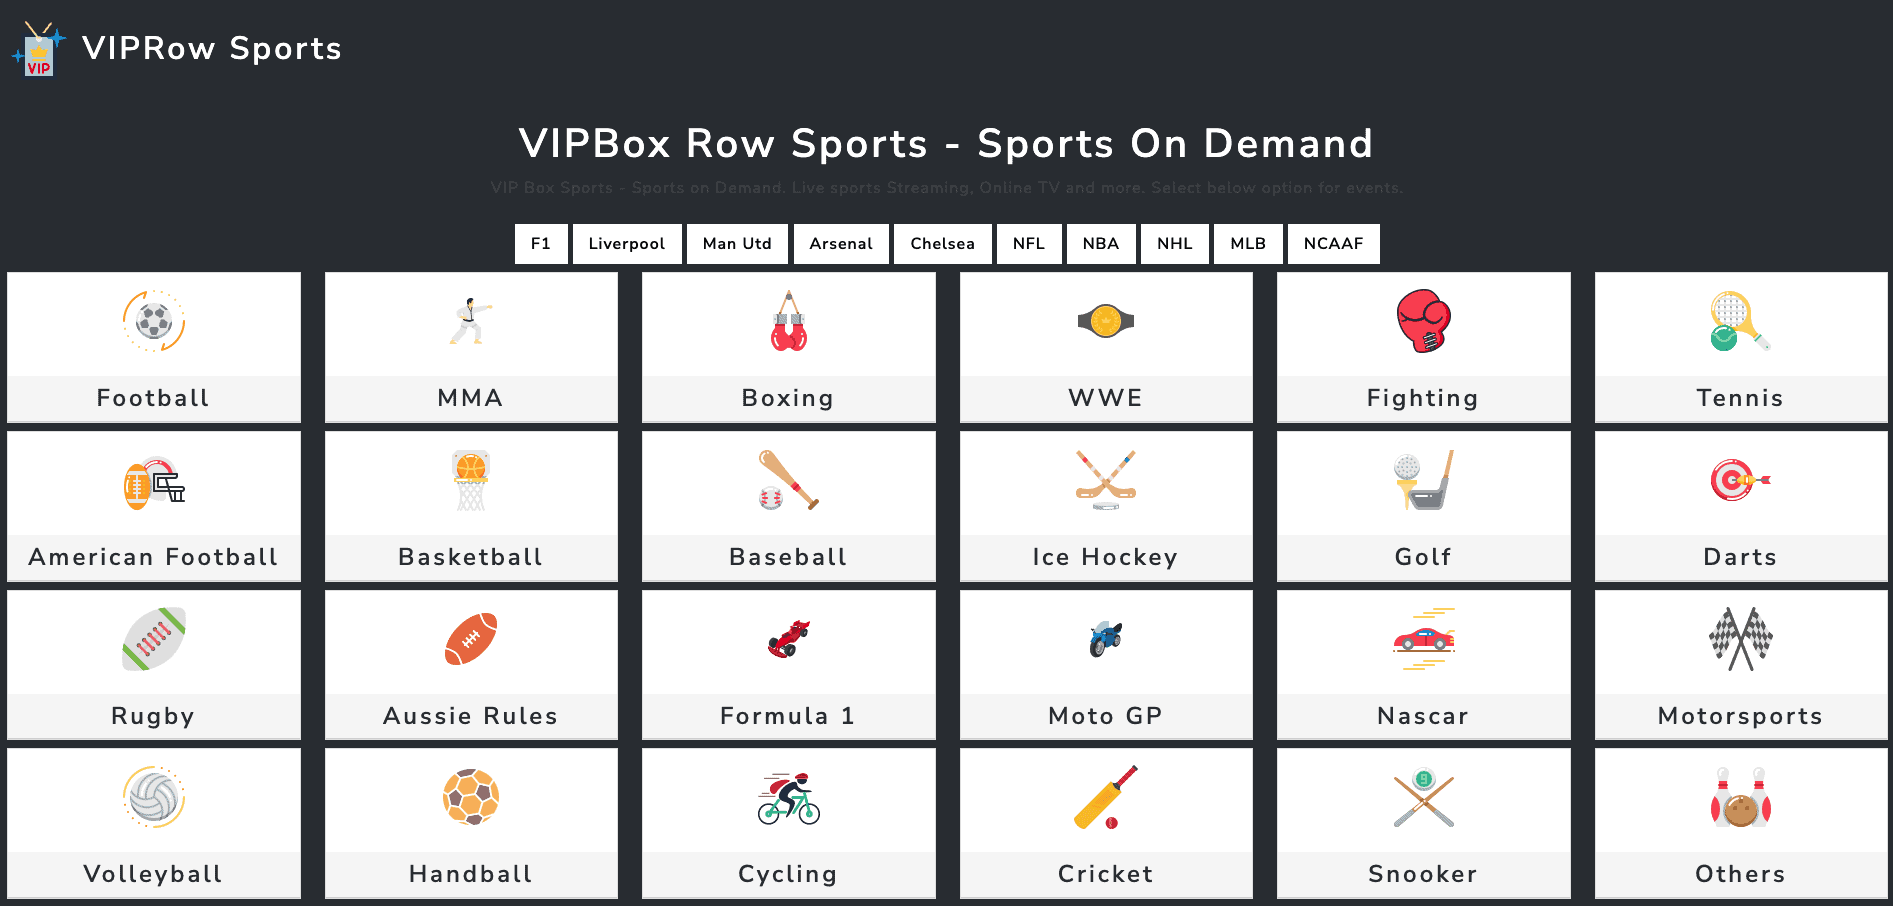 VIPRow Sports